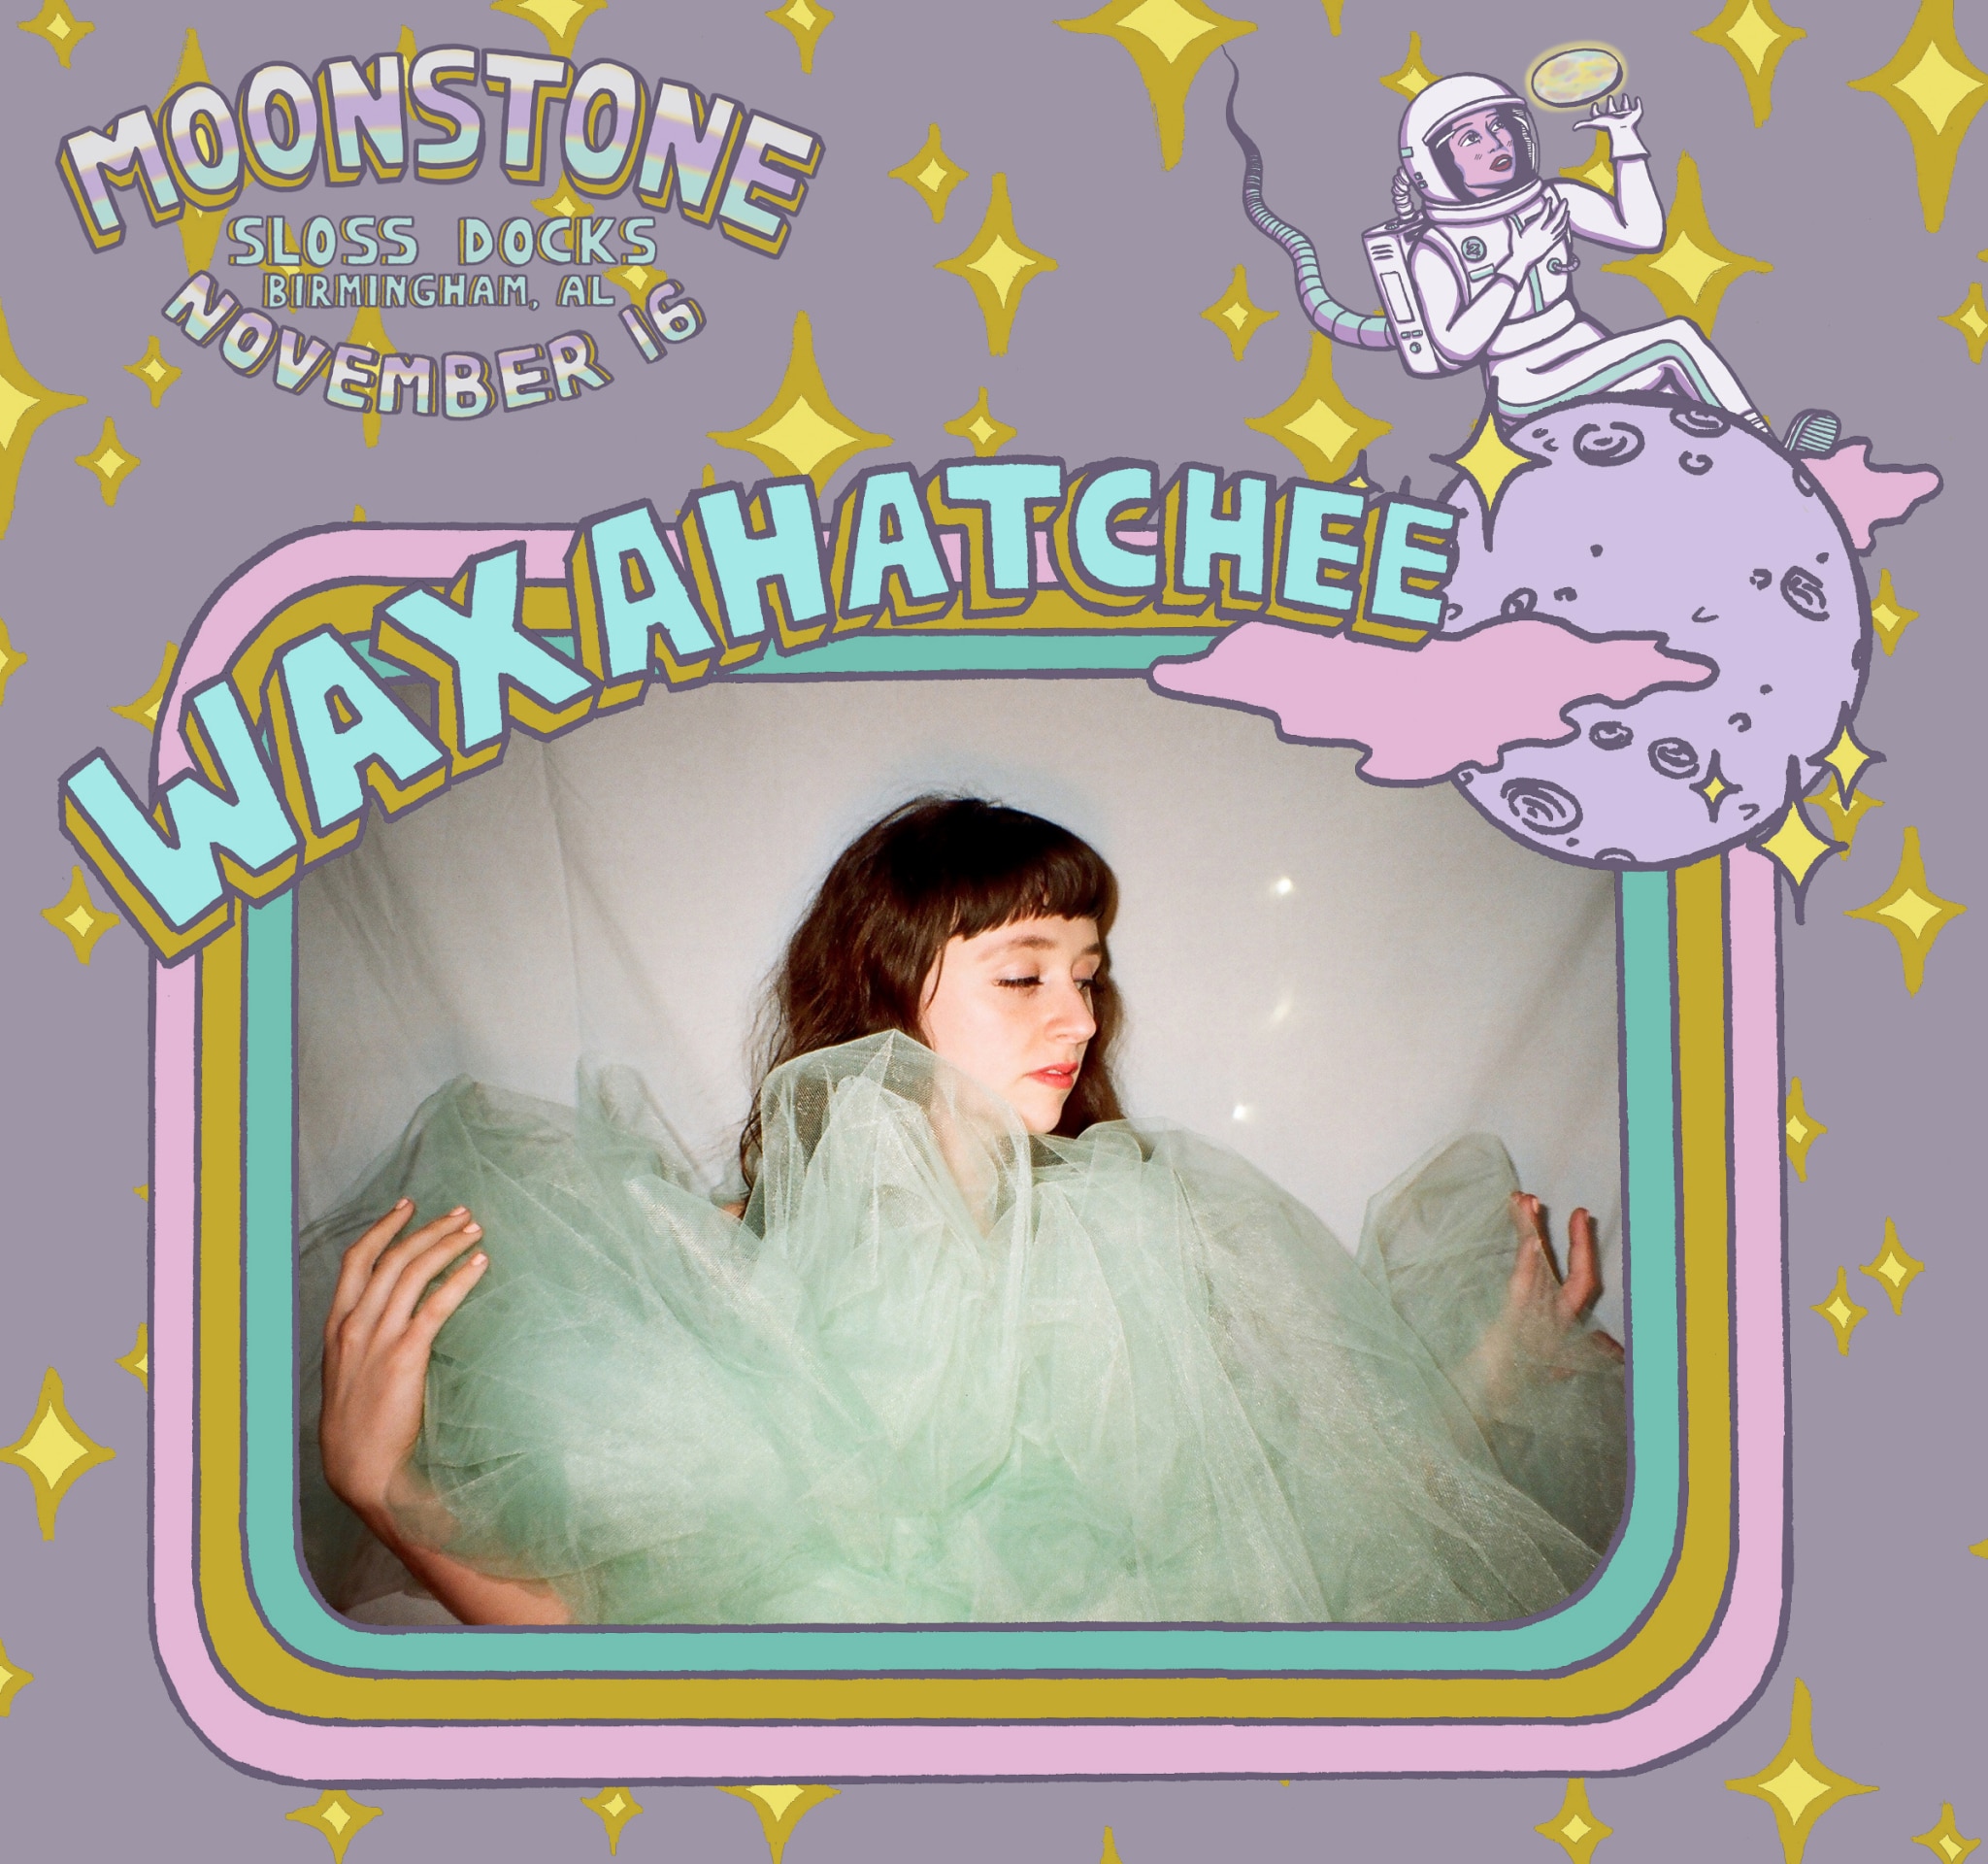 waxahatchee annouce Moonstone Festival, a female focused music and arts fest, happening Nov. 16th at Sloss Docks. Win VIP tickets!